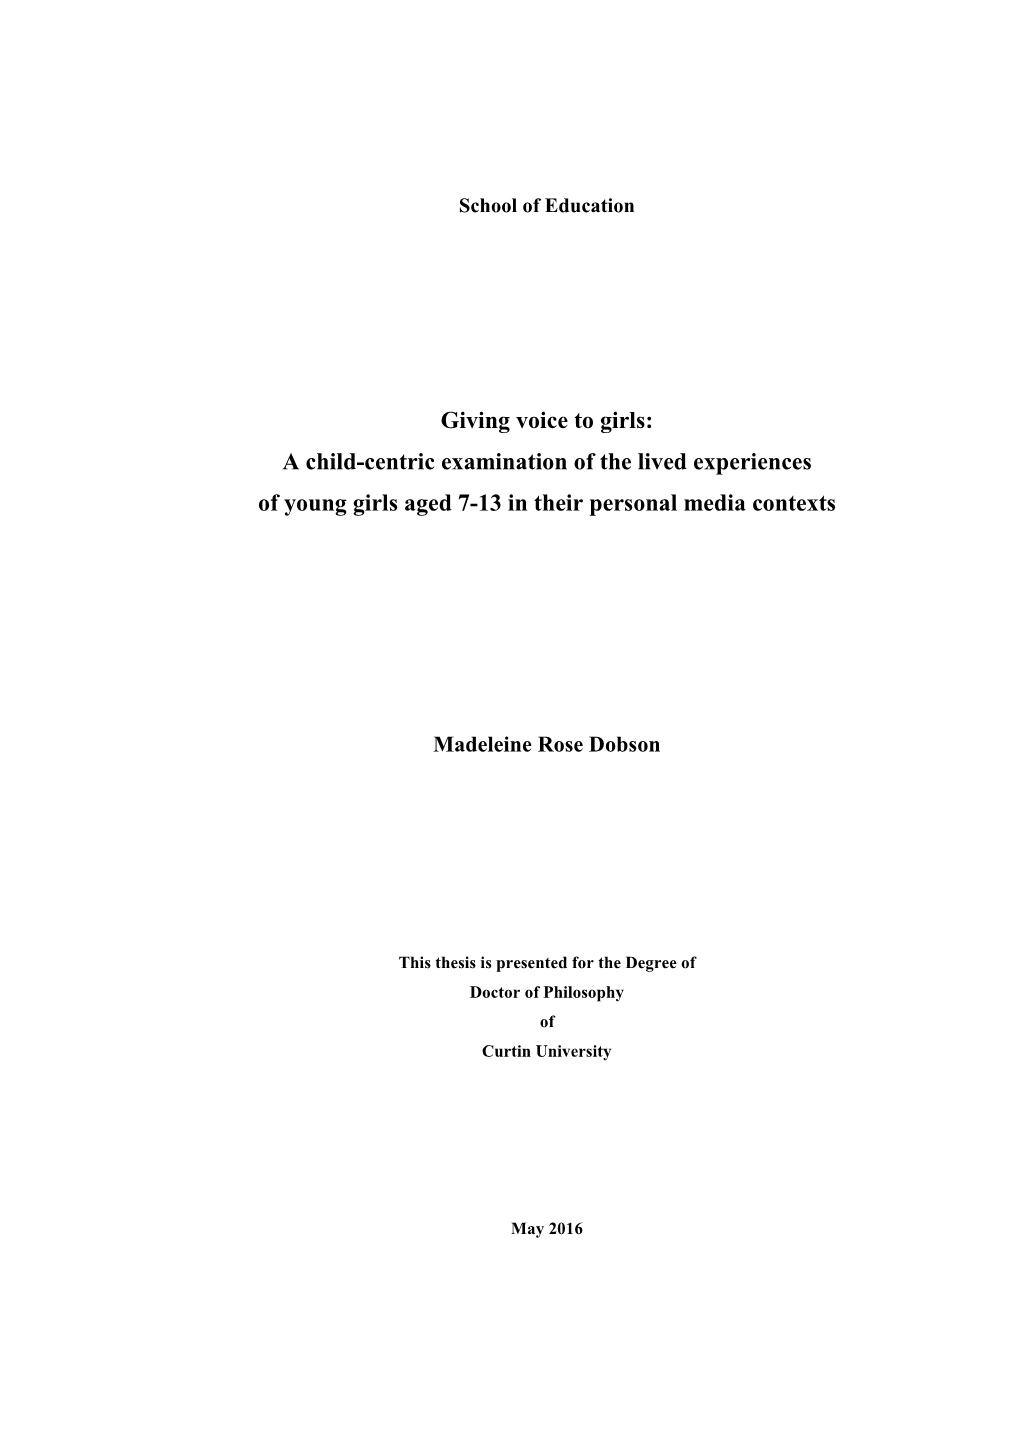 Giving Voice to Girls: a Child-Centric Examination of the Lived Experiences of Young Girls Aged 7-13 in Their Personal Media Contexts